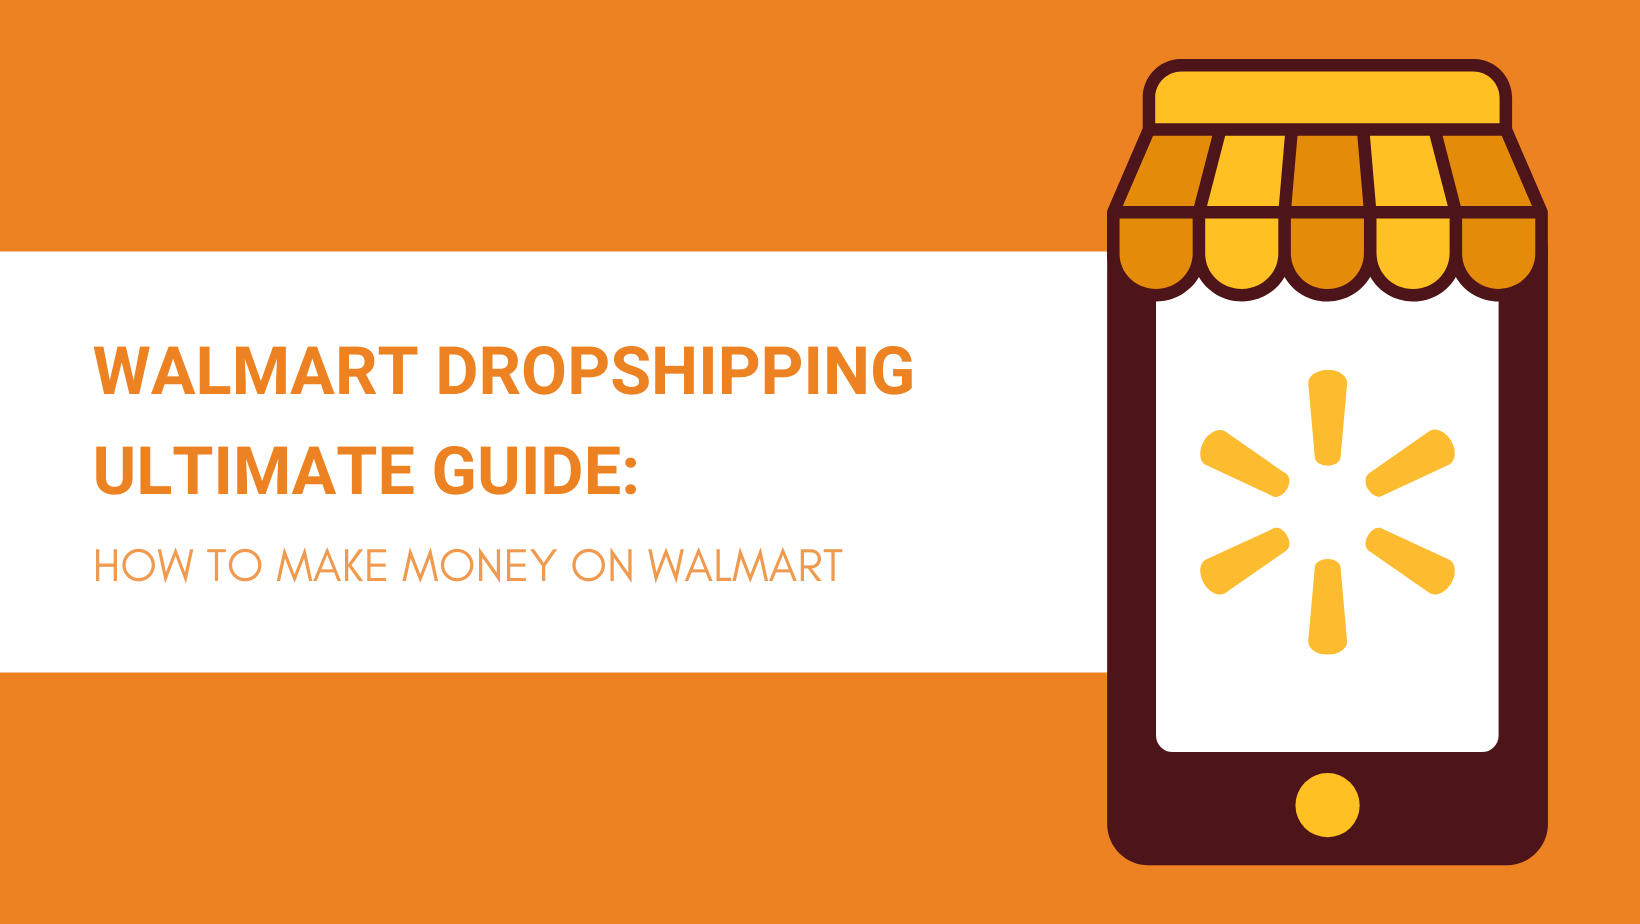 WALMART DROPSHIPPING ULTIMATE GUIDE HOW TO MAKE MONEY ON WALMART